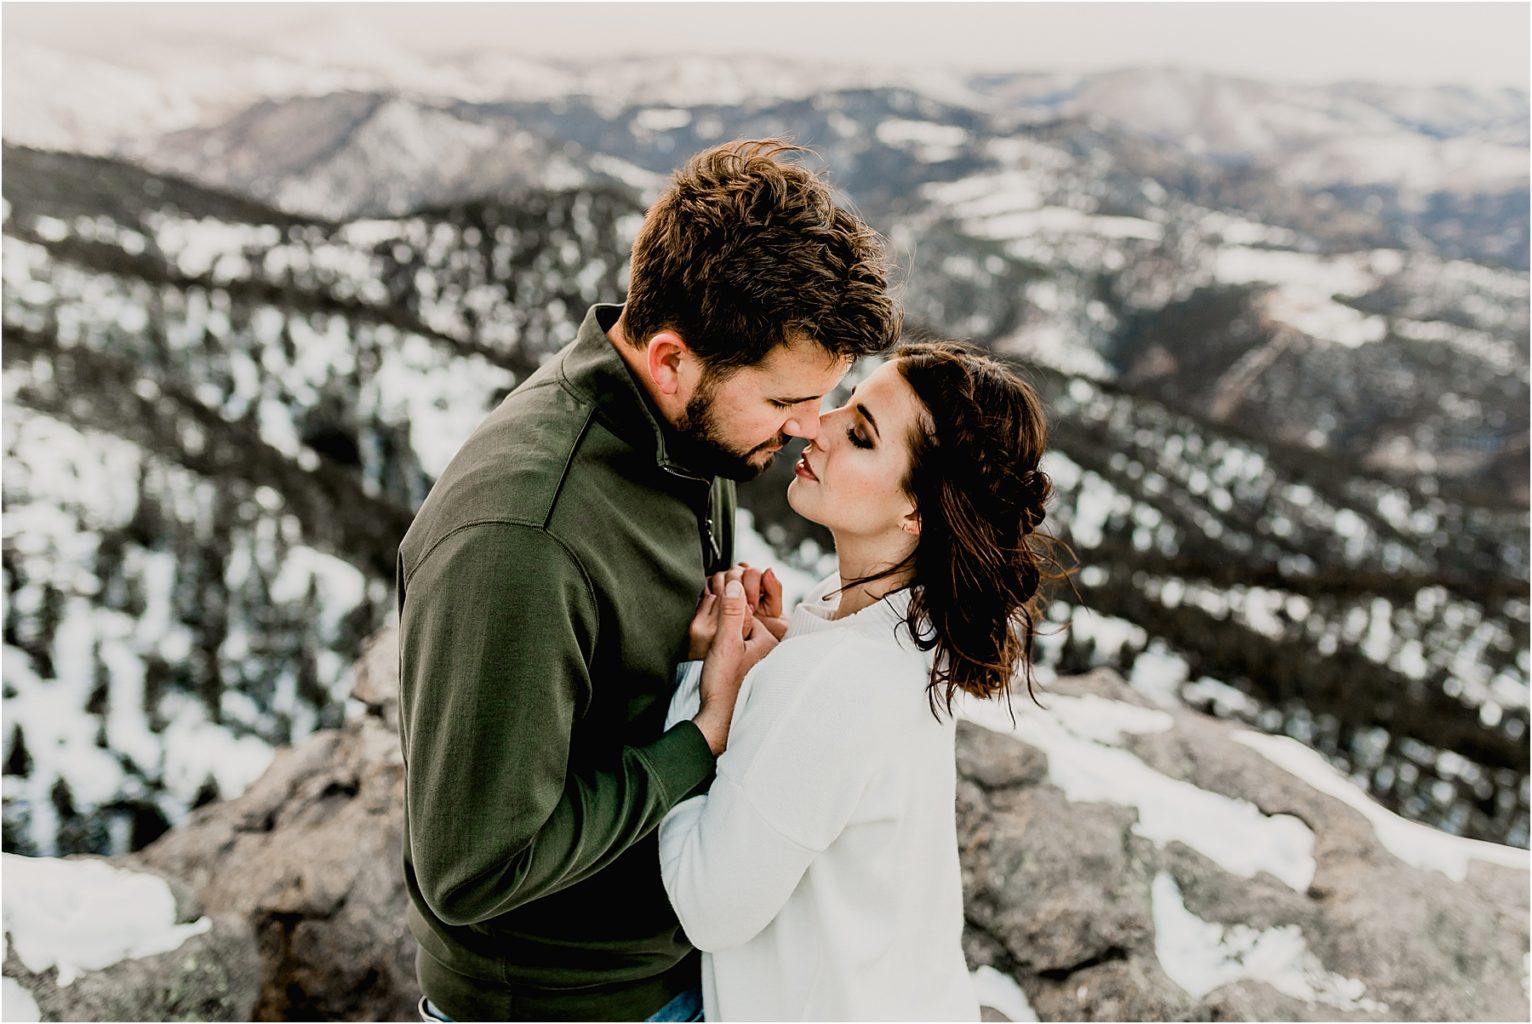 beautiful colorado engagement session in the snow covered trees and mountains of lost gulch lookout